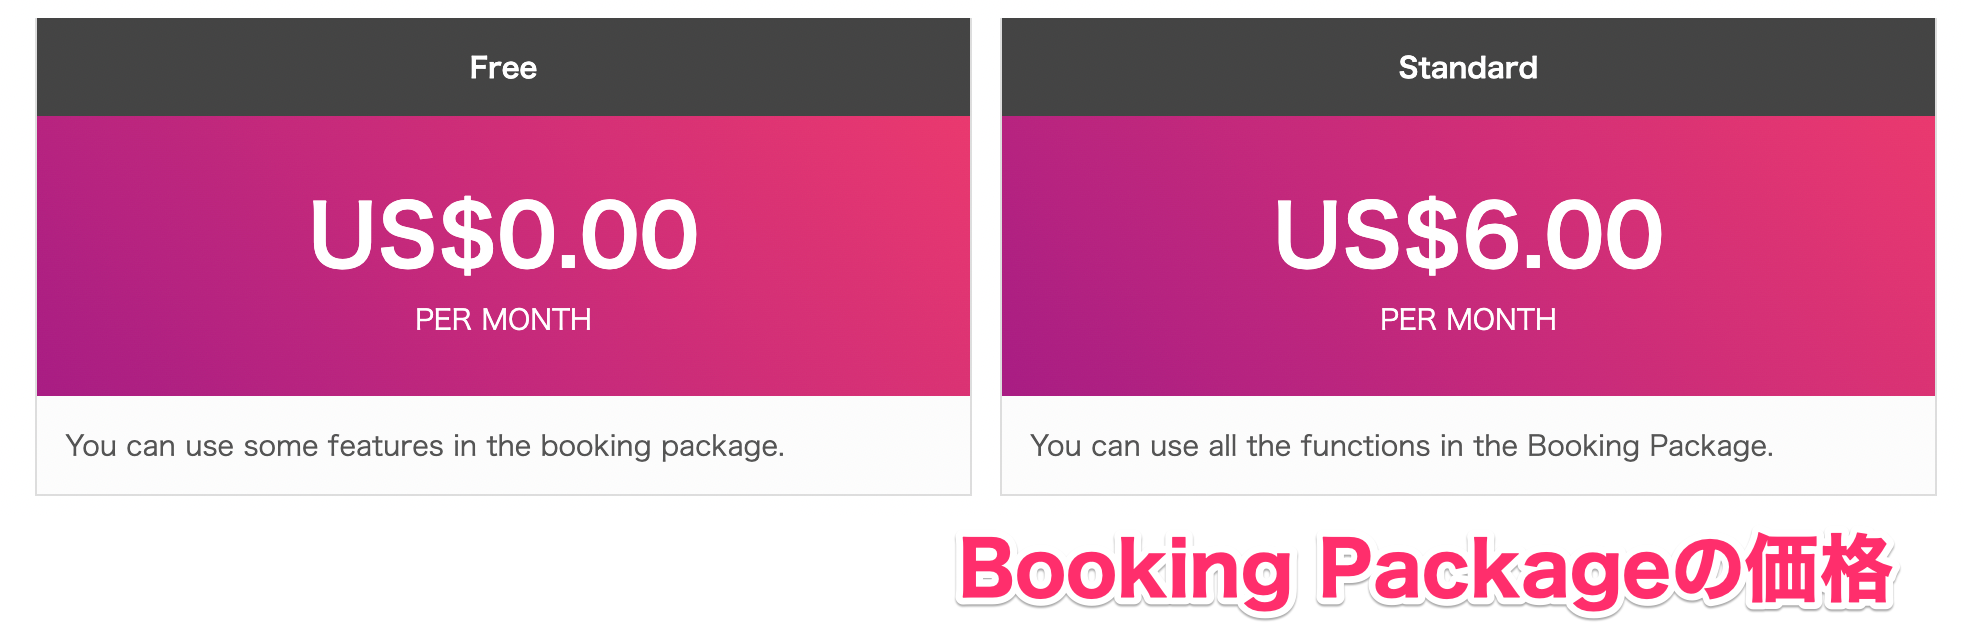 Booking Packageの価格